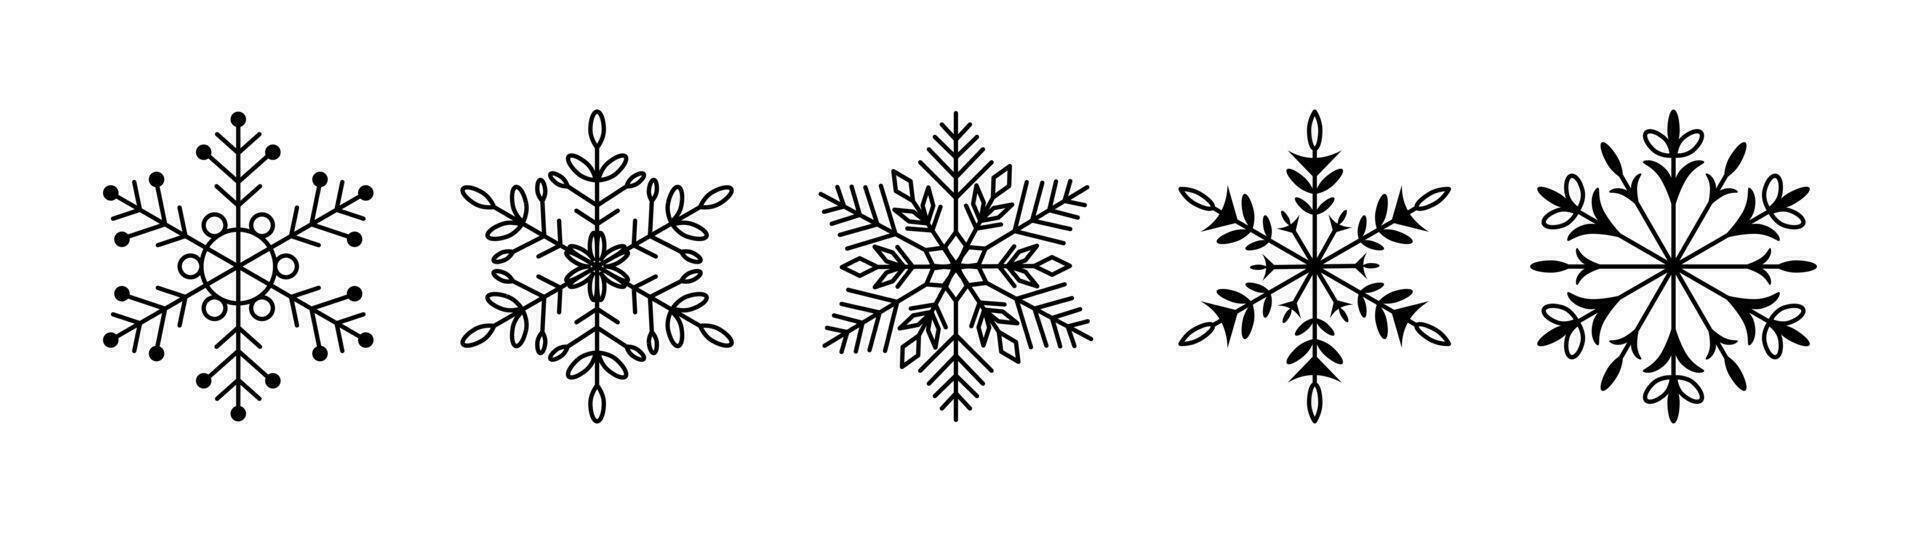 Beautiful snowflakes isolated on a white background. Snow icons. Elements for Christmas and New Year banner. vector